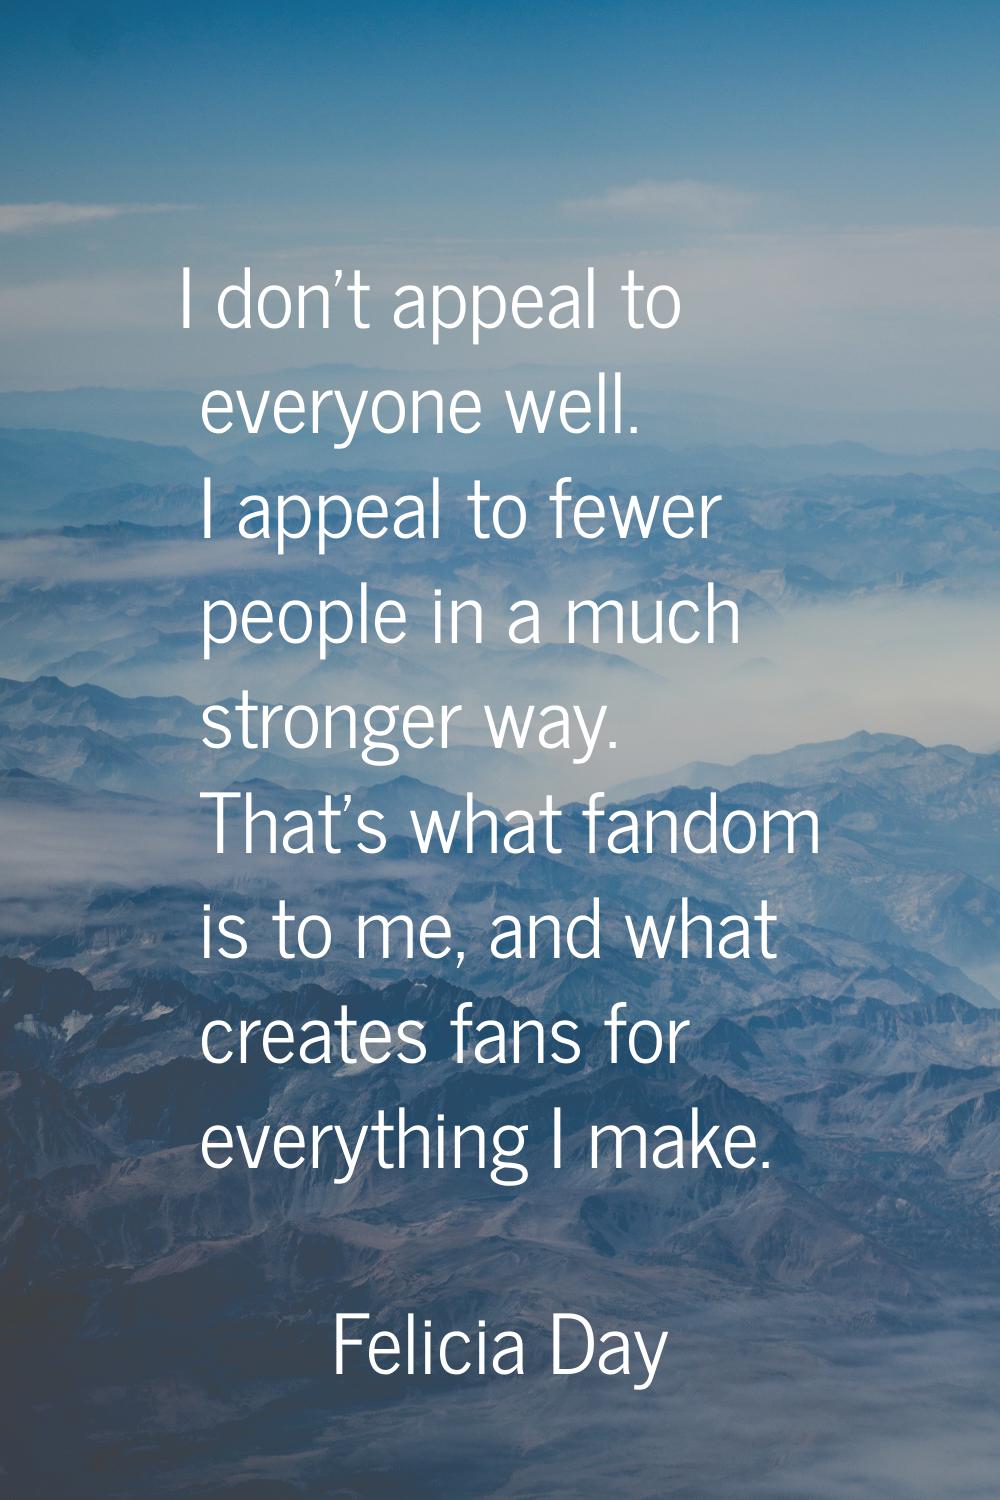 I don't appeal to everyone well. I appeal to fewer people in a much stronger way. That's what fando